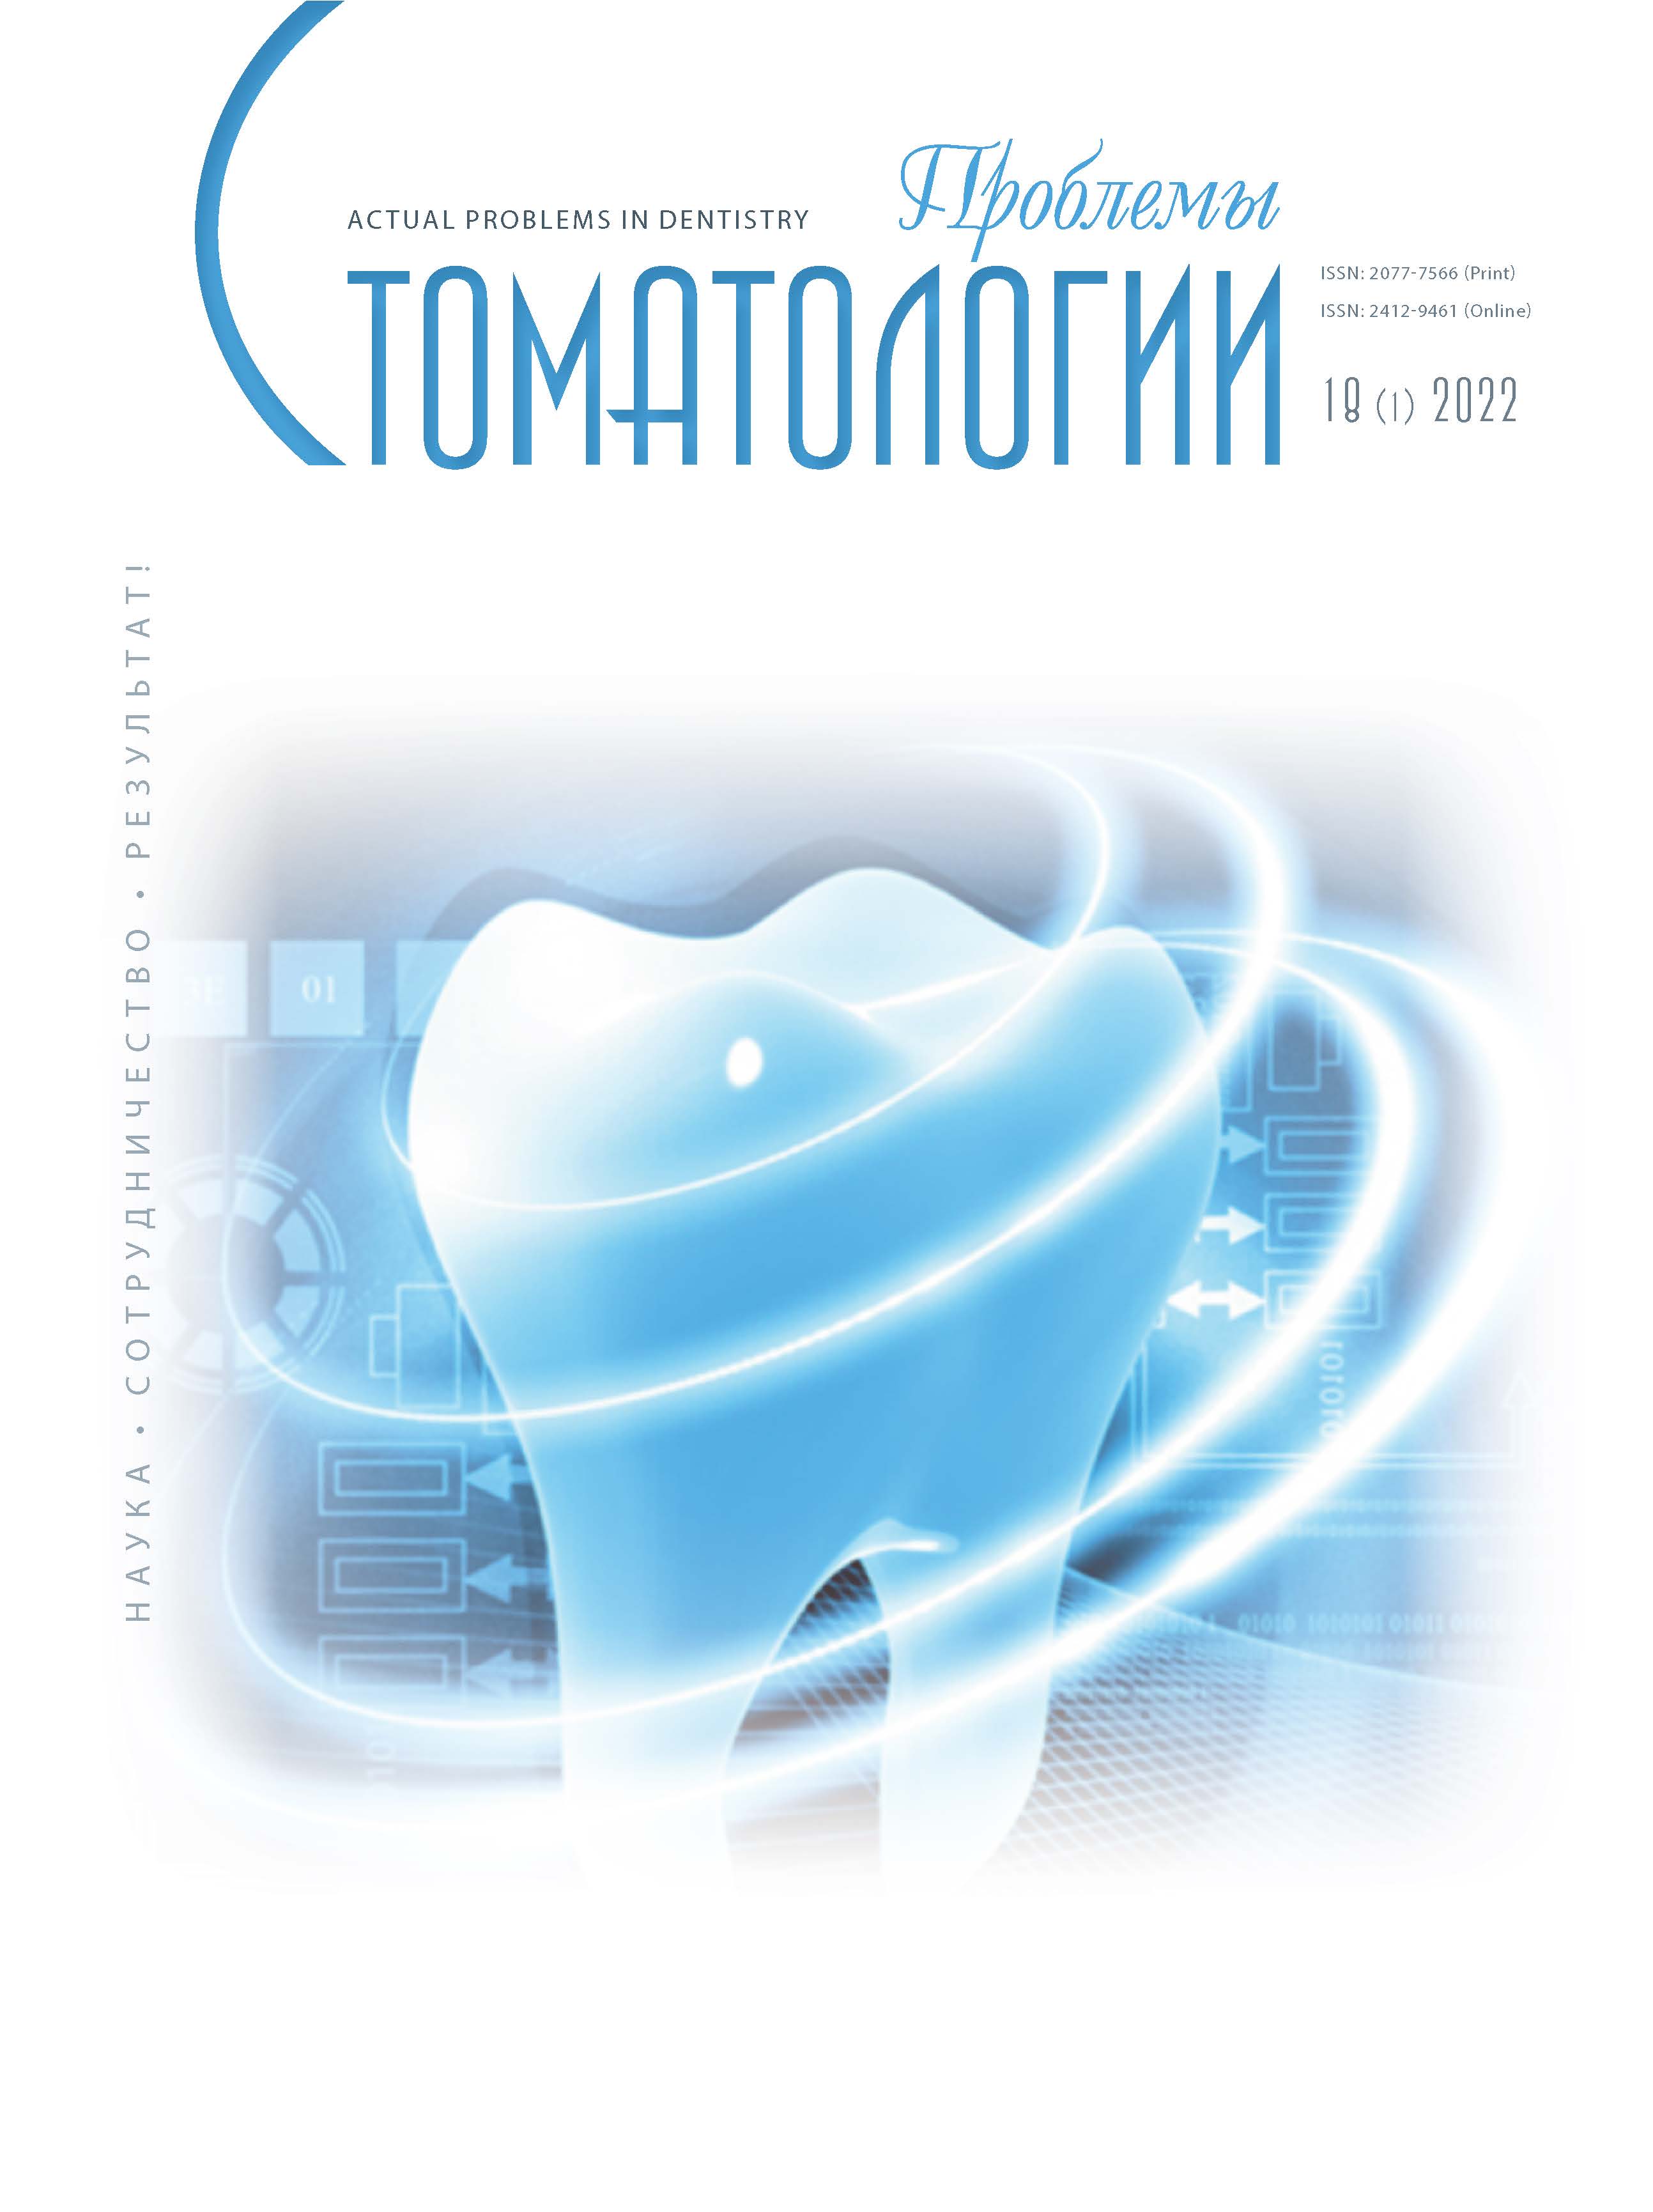                         COMPARATIVE ANALYSIS OF INNOVATIVE METHODS OF TREATMENT OF INITIAL CARIES
            